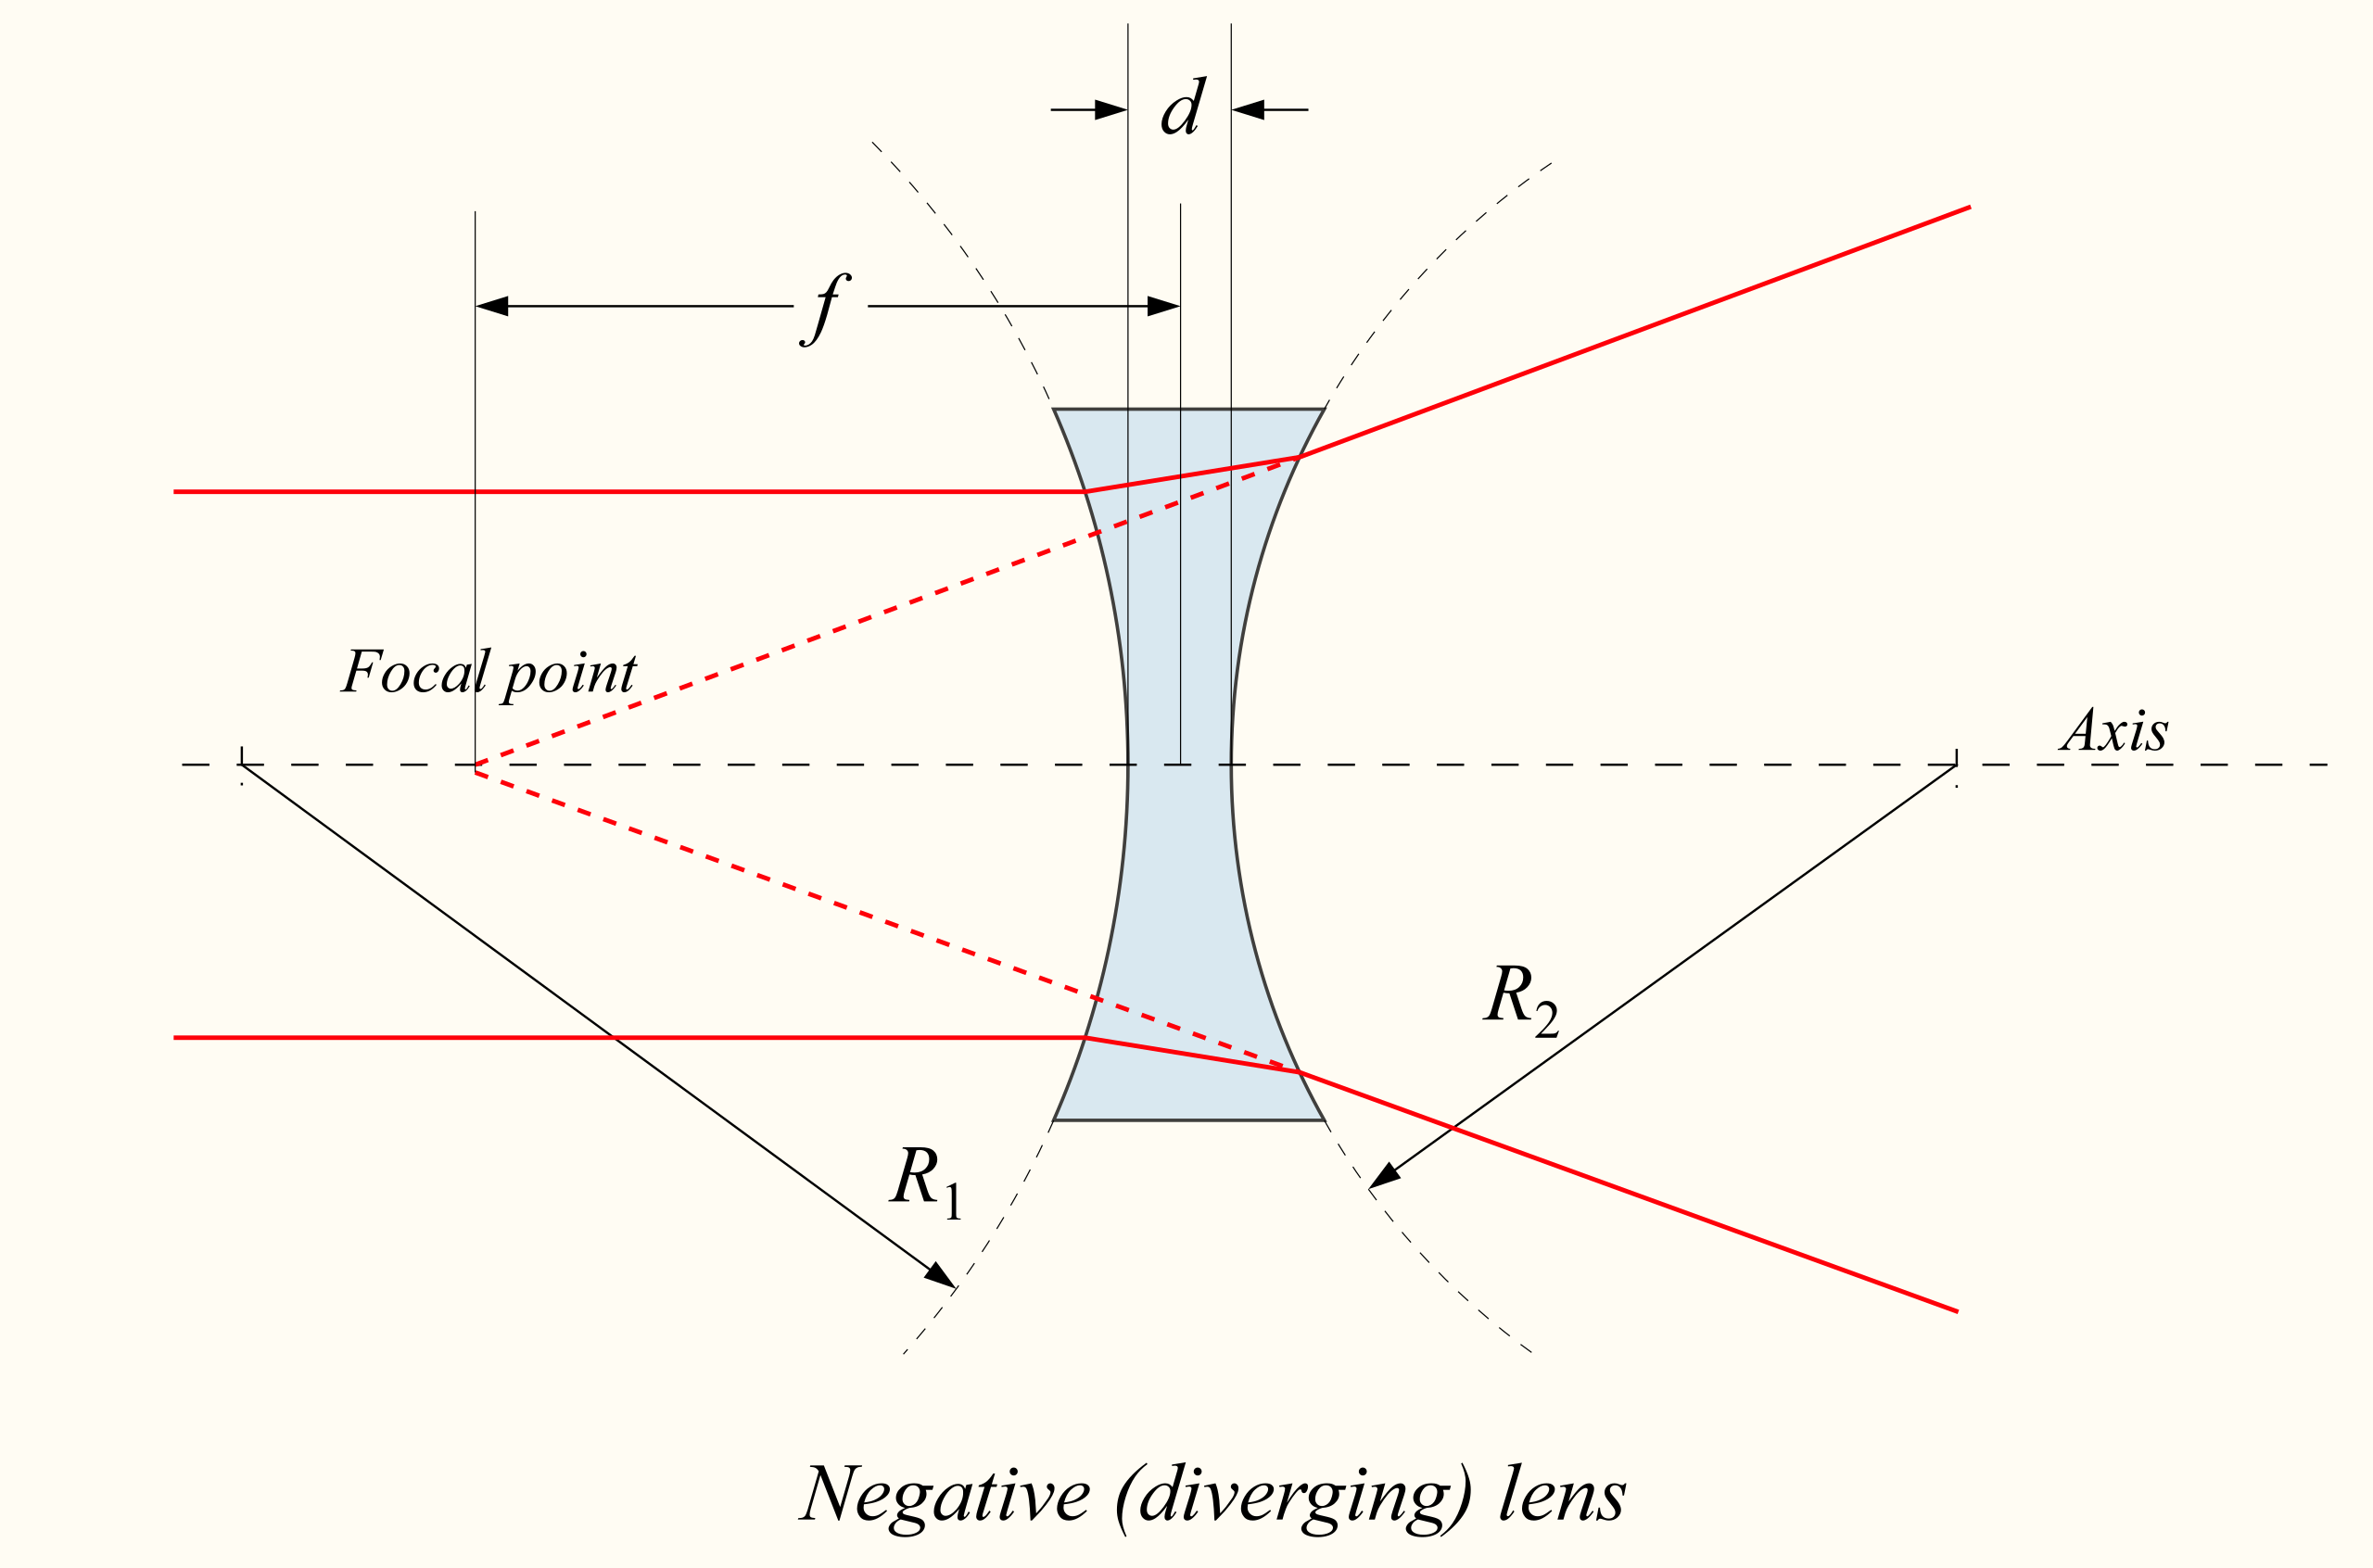 Measurements in a biconcave lens. [@drbob_negative_2006]. [CC BY 3.0 Unported](https://creativecommons.org/licenses/by/3.0/)